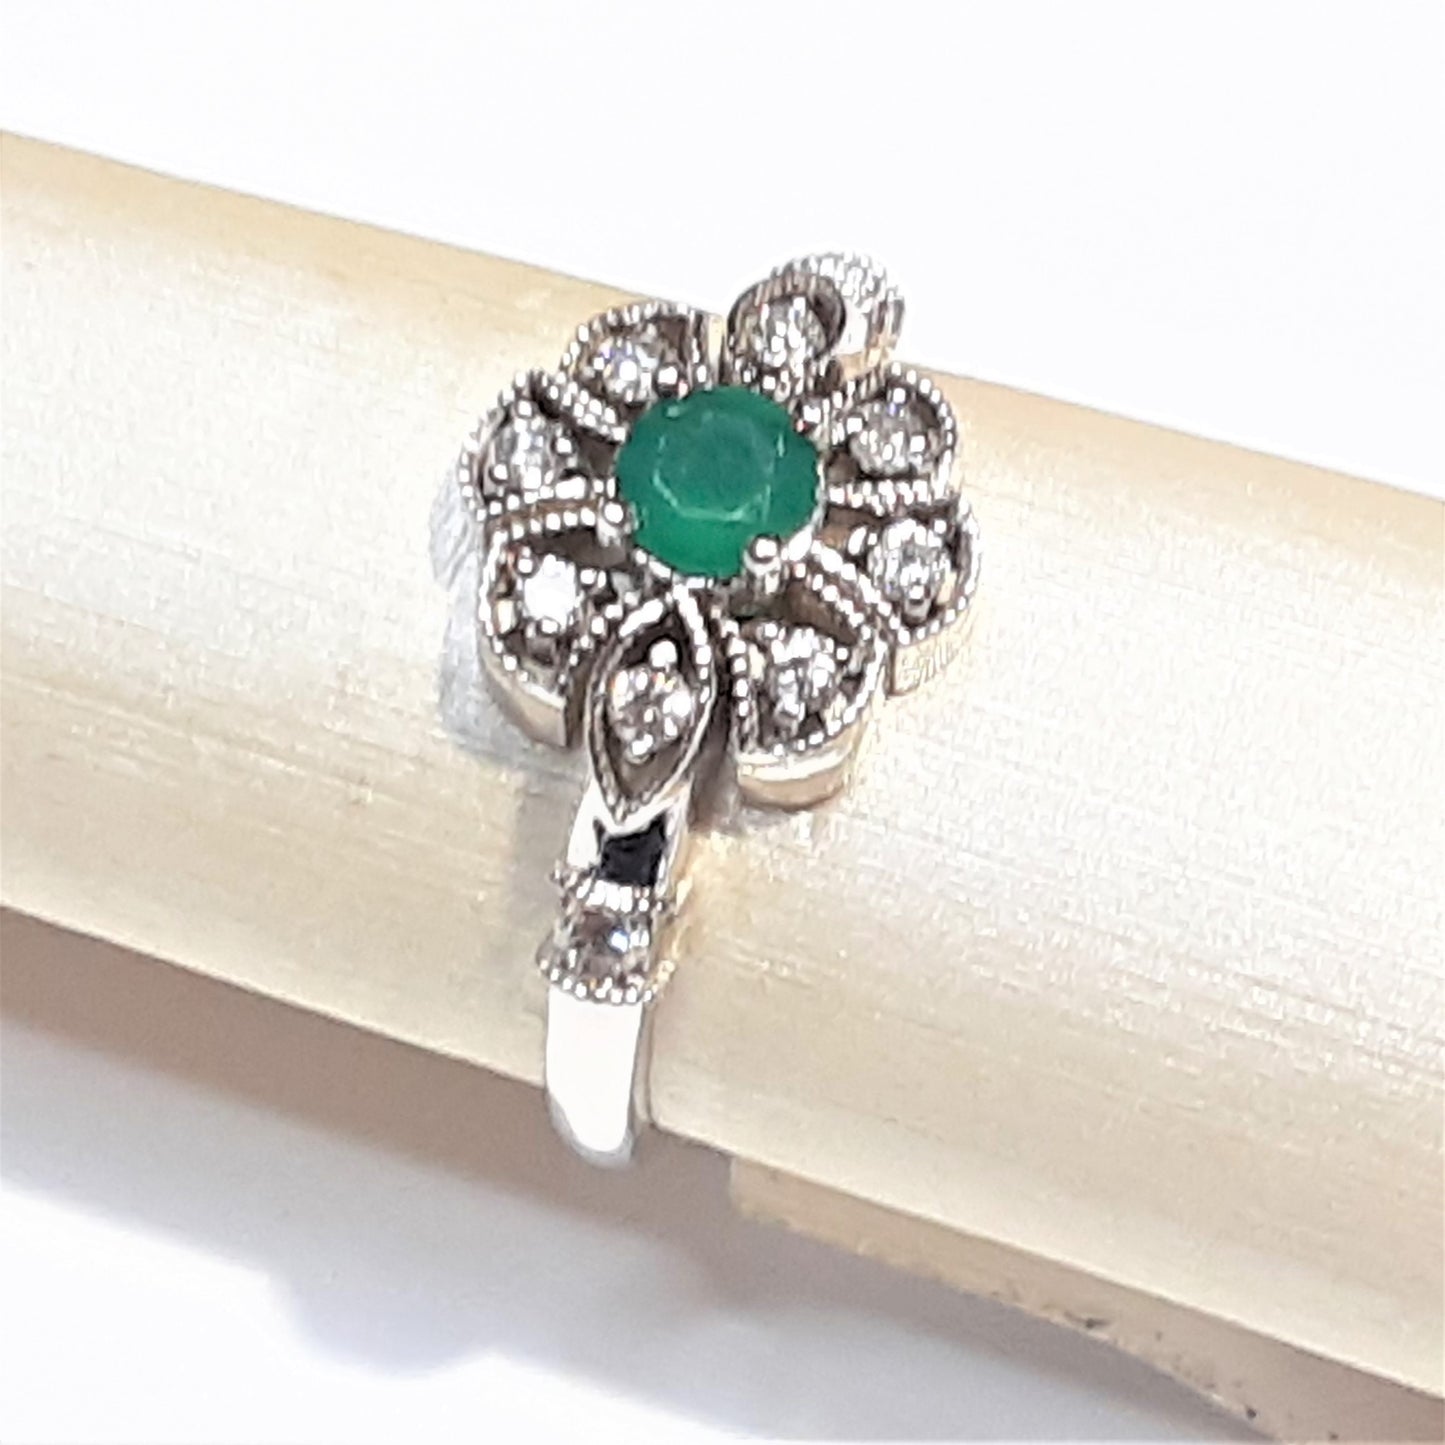 Ready to ship emerald and diamond Art Deco style ring in 14k white gold